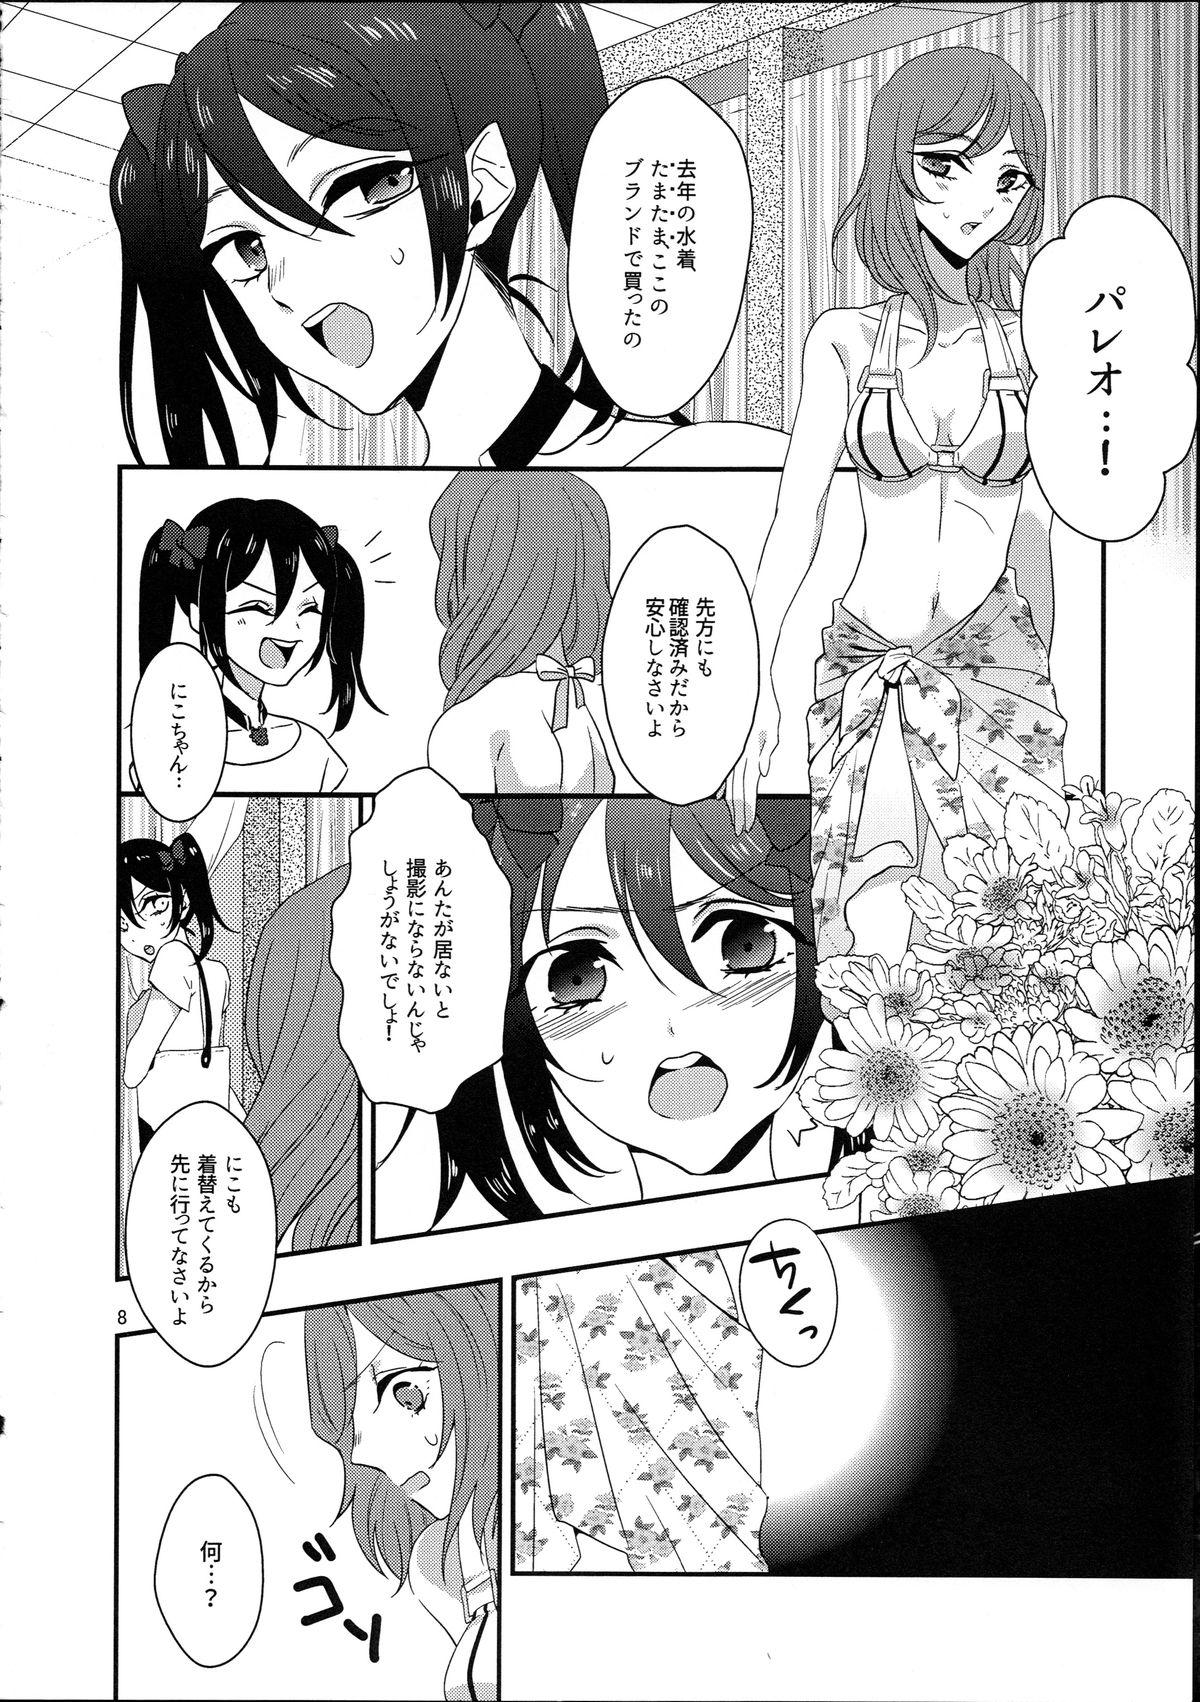 Compilation Maki-chin!? - Love live Brunettes - Page 8